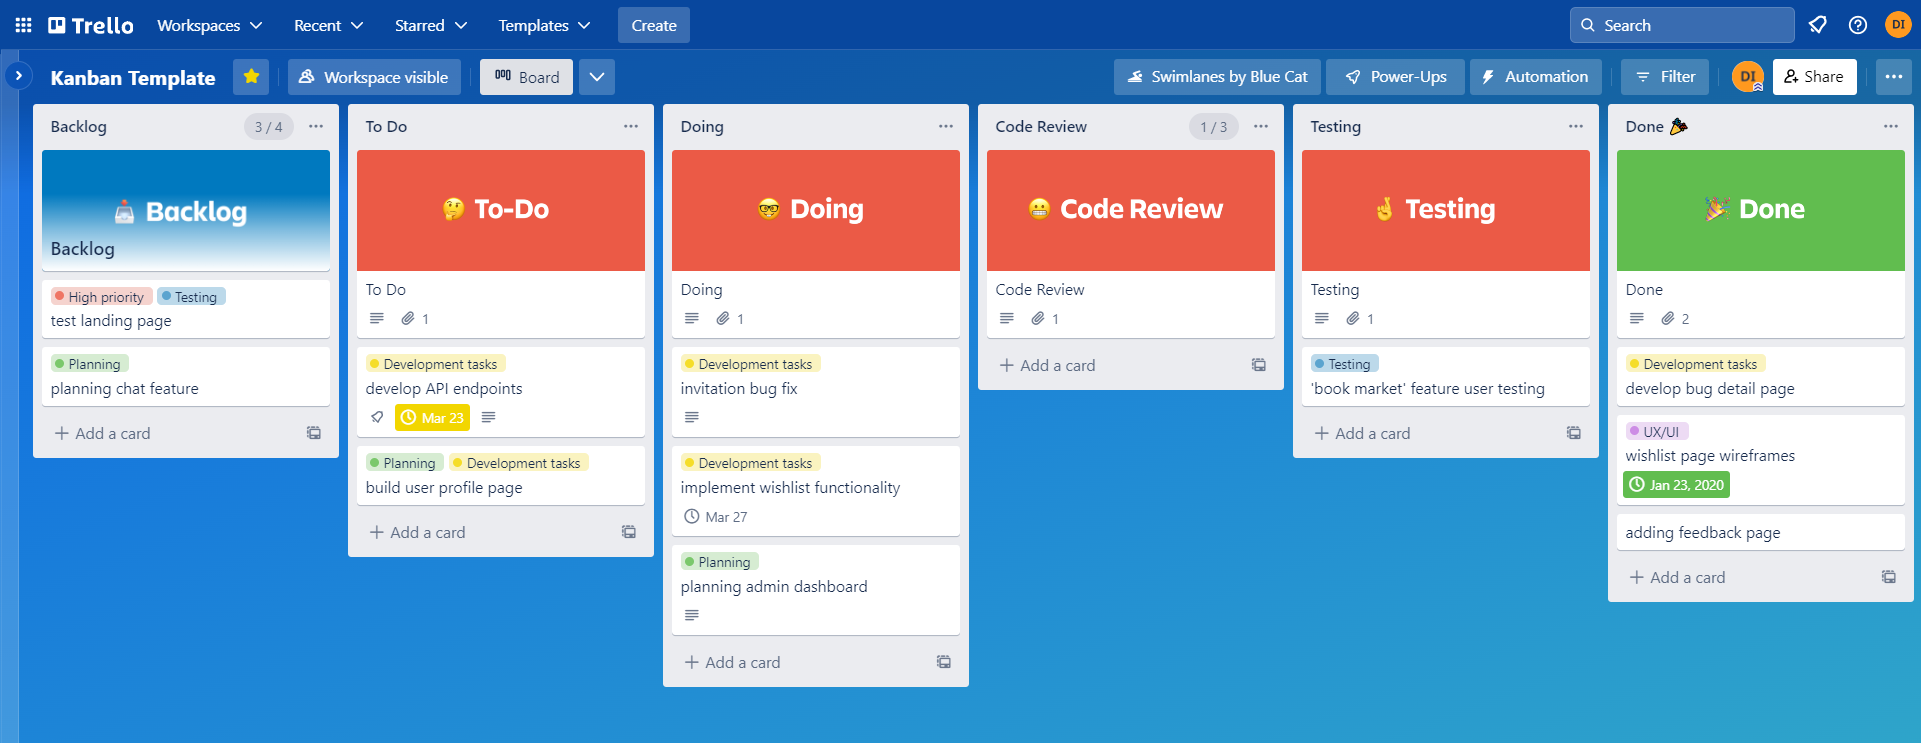 An example Kanban board created with Trello